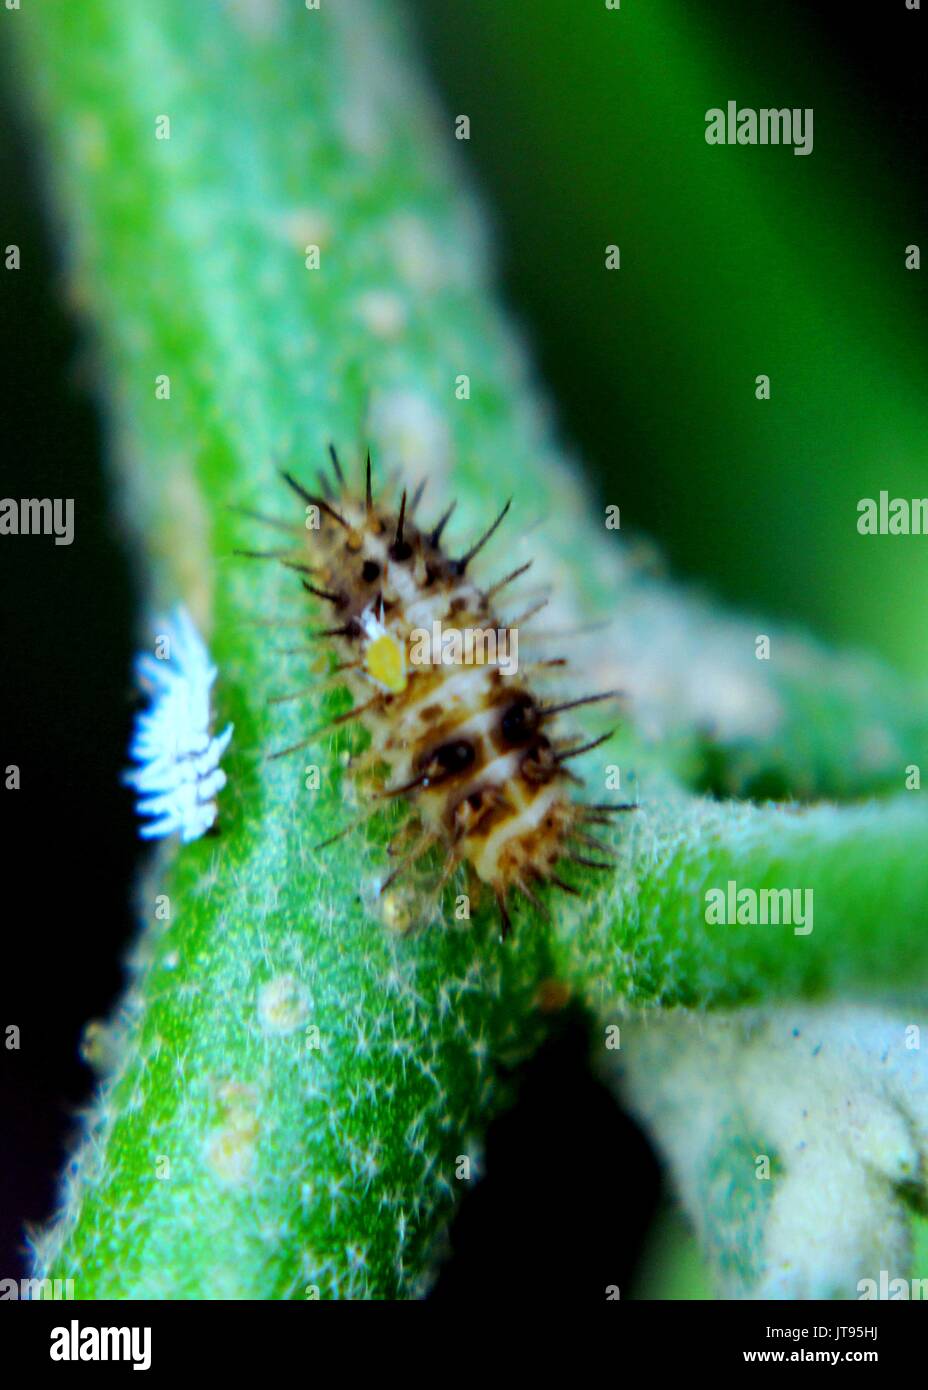 close-up, macro view of a small colorful caterpillar - insect  on a green plant - leaf - stem in a home garden in Sri Lanka Stock Photo